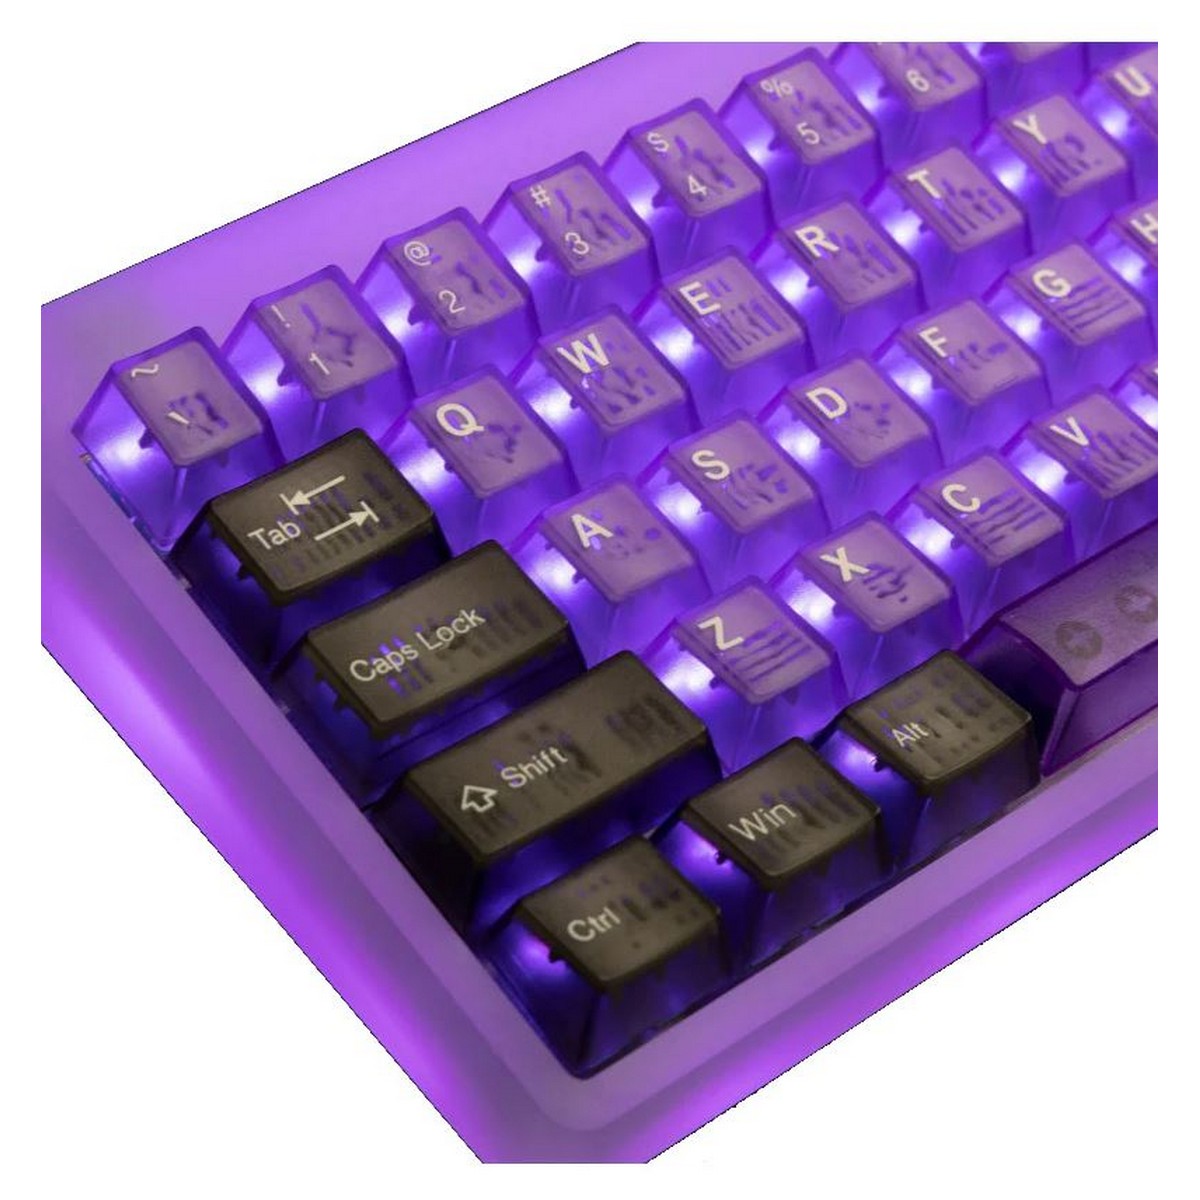 Tai-Hao Translucent Cubic ABS Keycaps